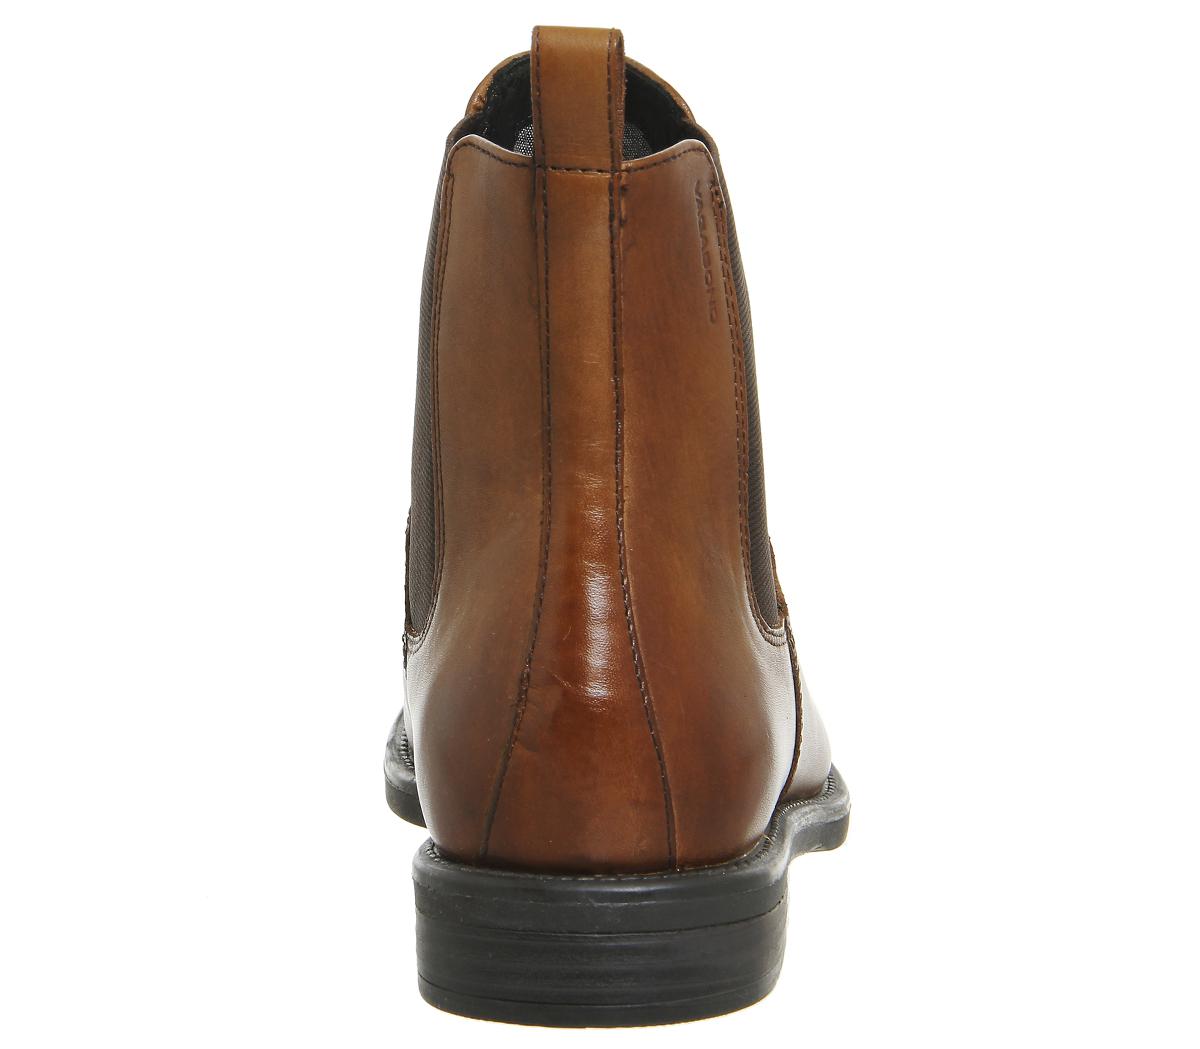 Vagabond Amina Chelsea Leather Boots in Cognac Leather (Brown) - Lyst